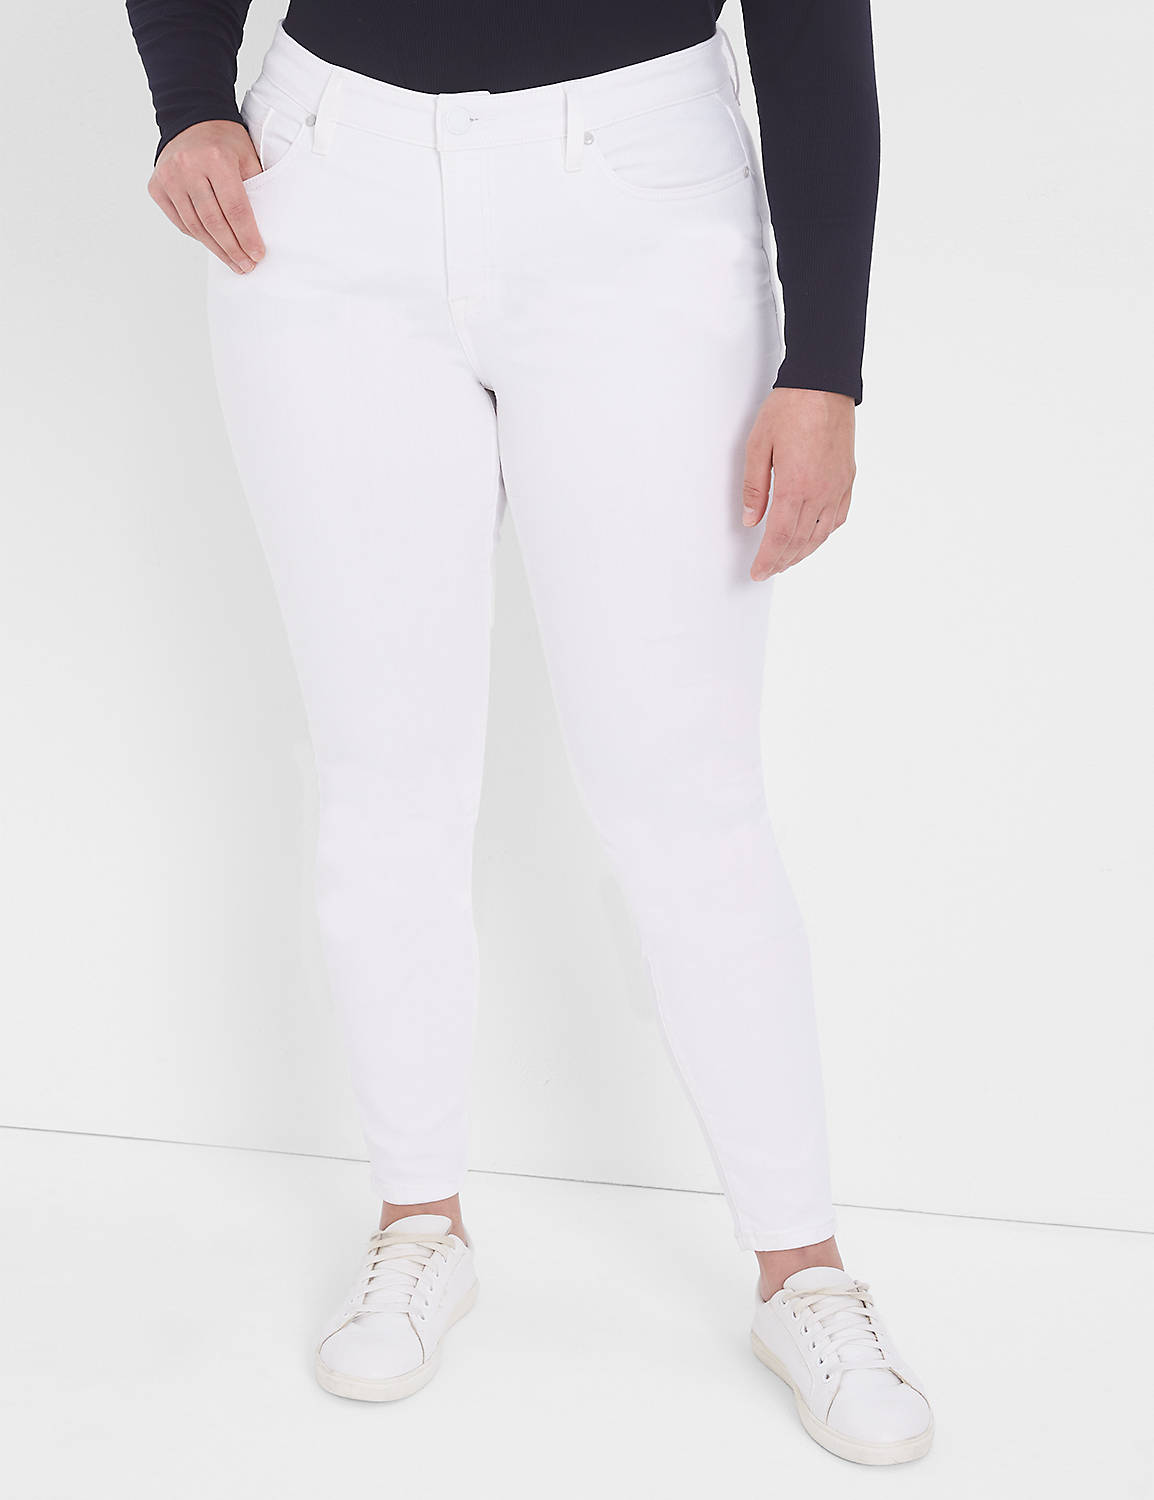 SIGNATURE FIT MID RISE SKINNY - COL Product Image 1